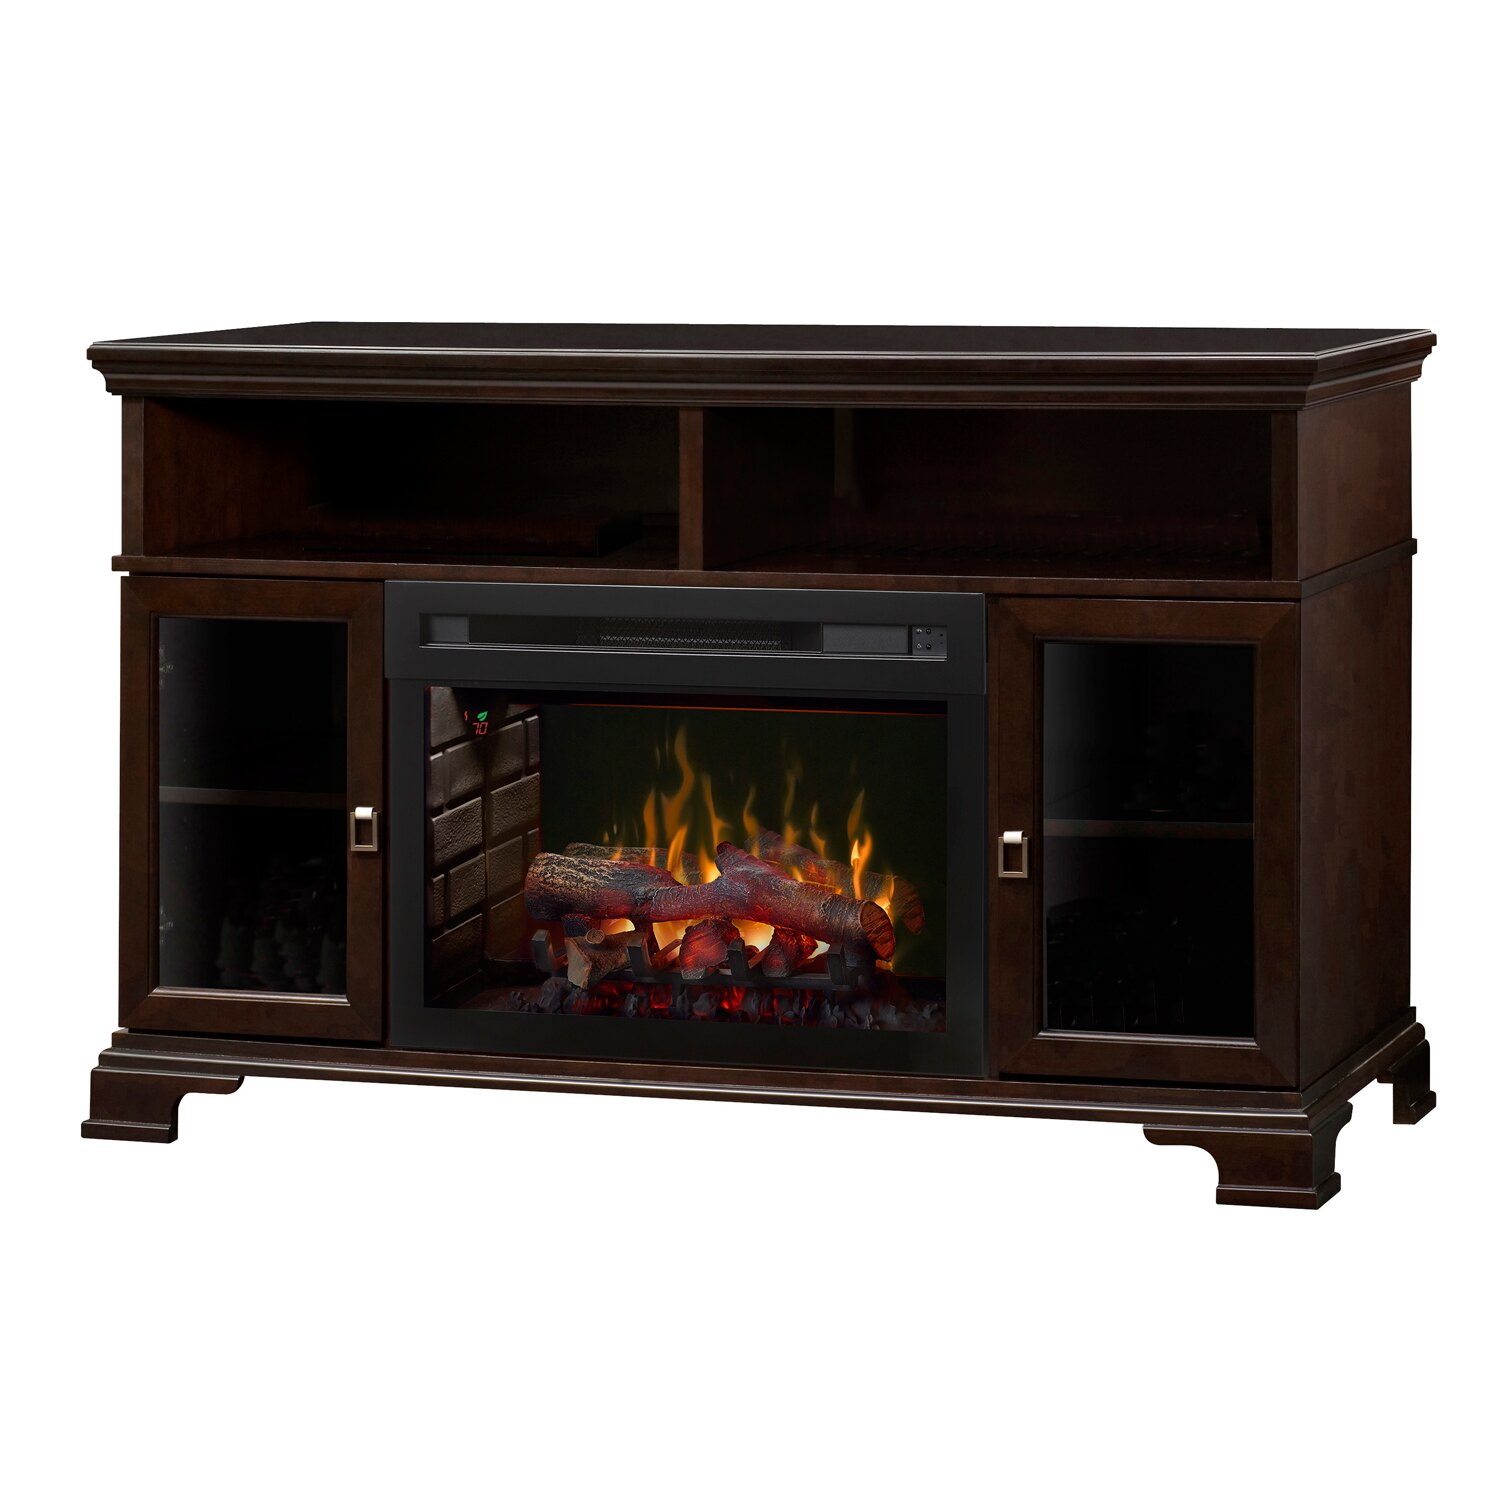 3 Sided Electric Fireplace Beautiful Dimplex Electric Fireplace Brookings with Logs Espresso